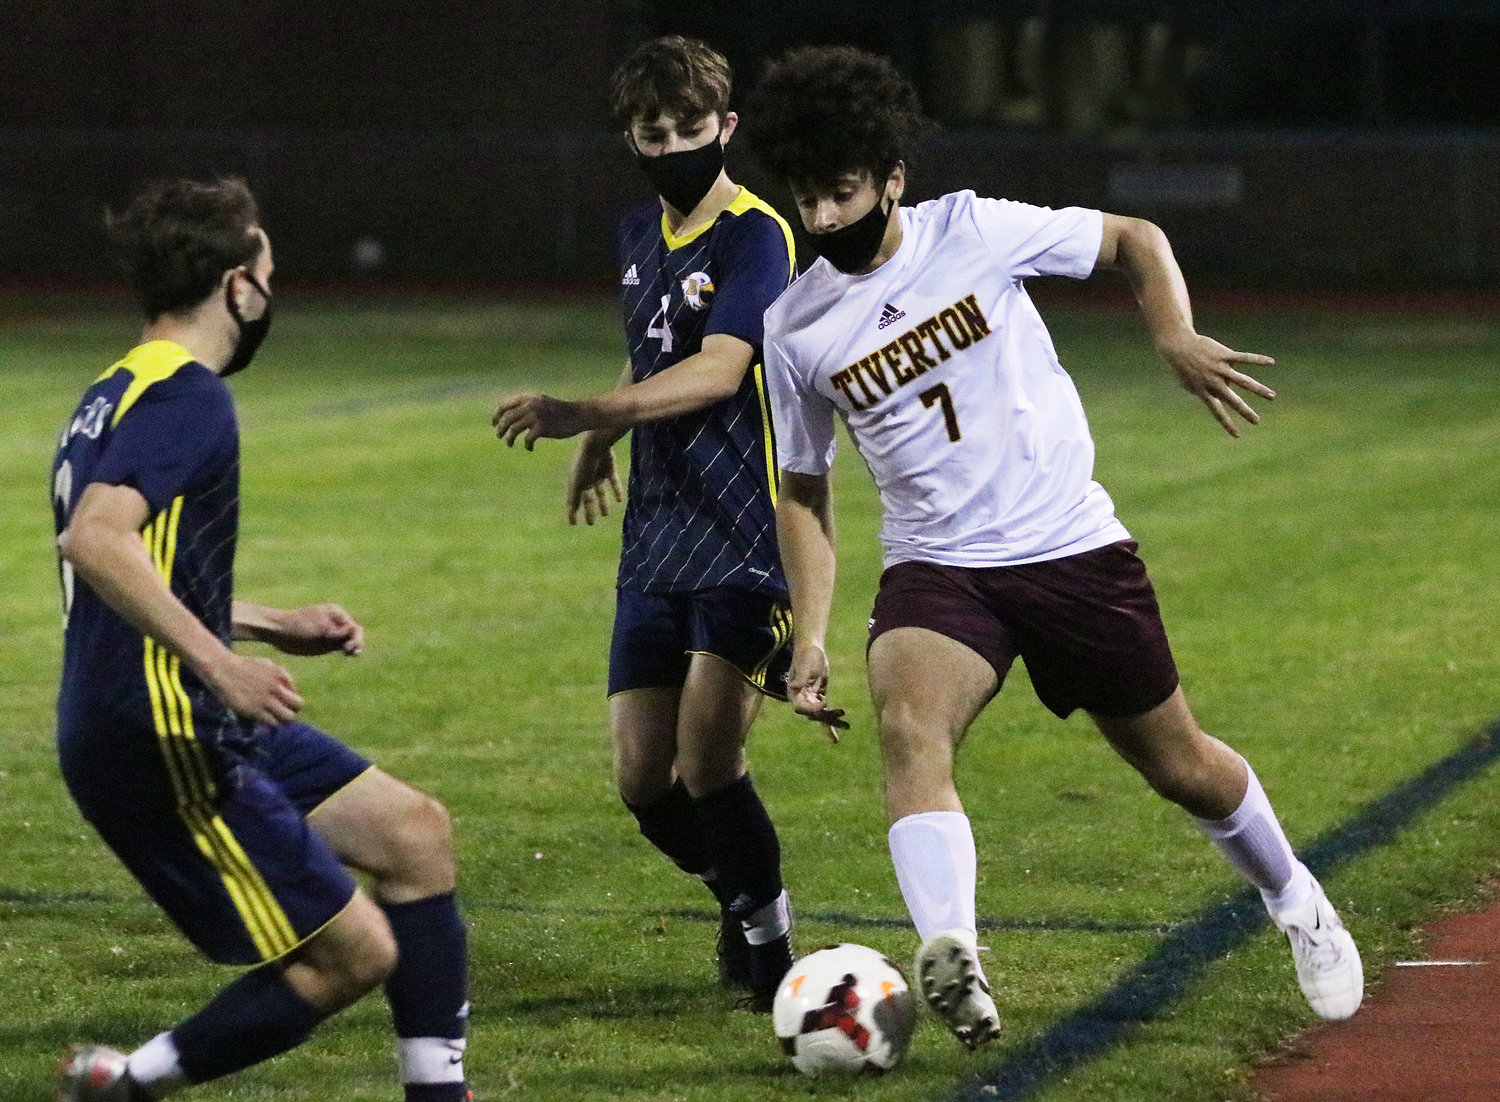 A pair of Barrington players look to contain a Tiverton player during the Eagles' 0-0 tie last week.